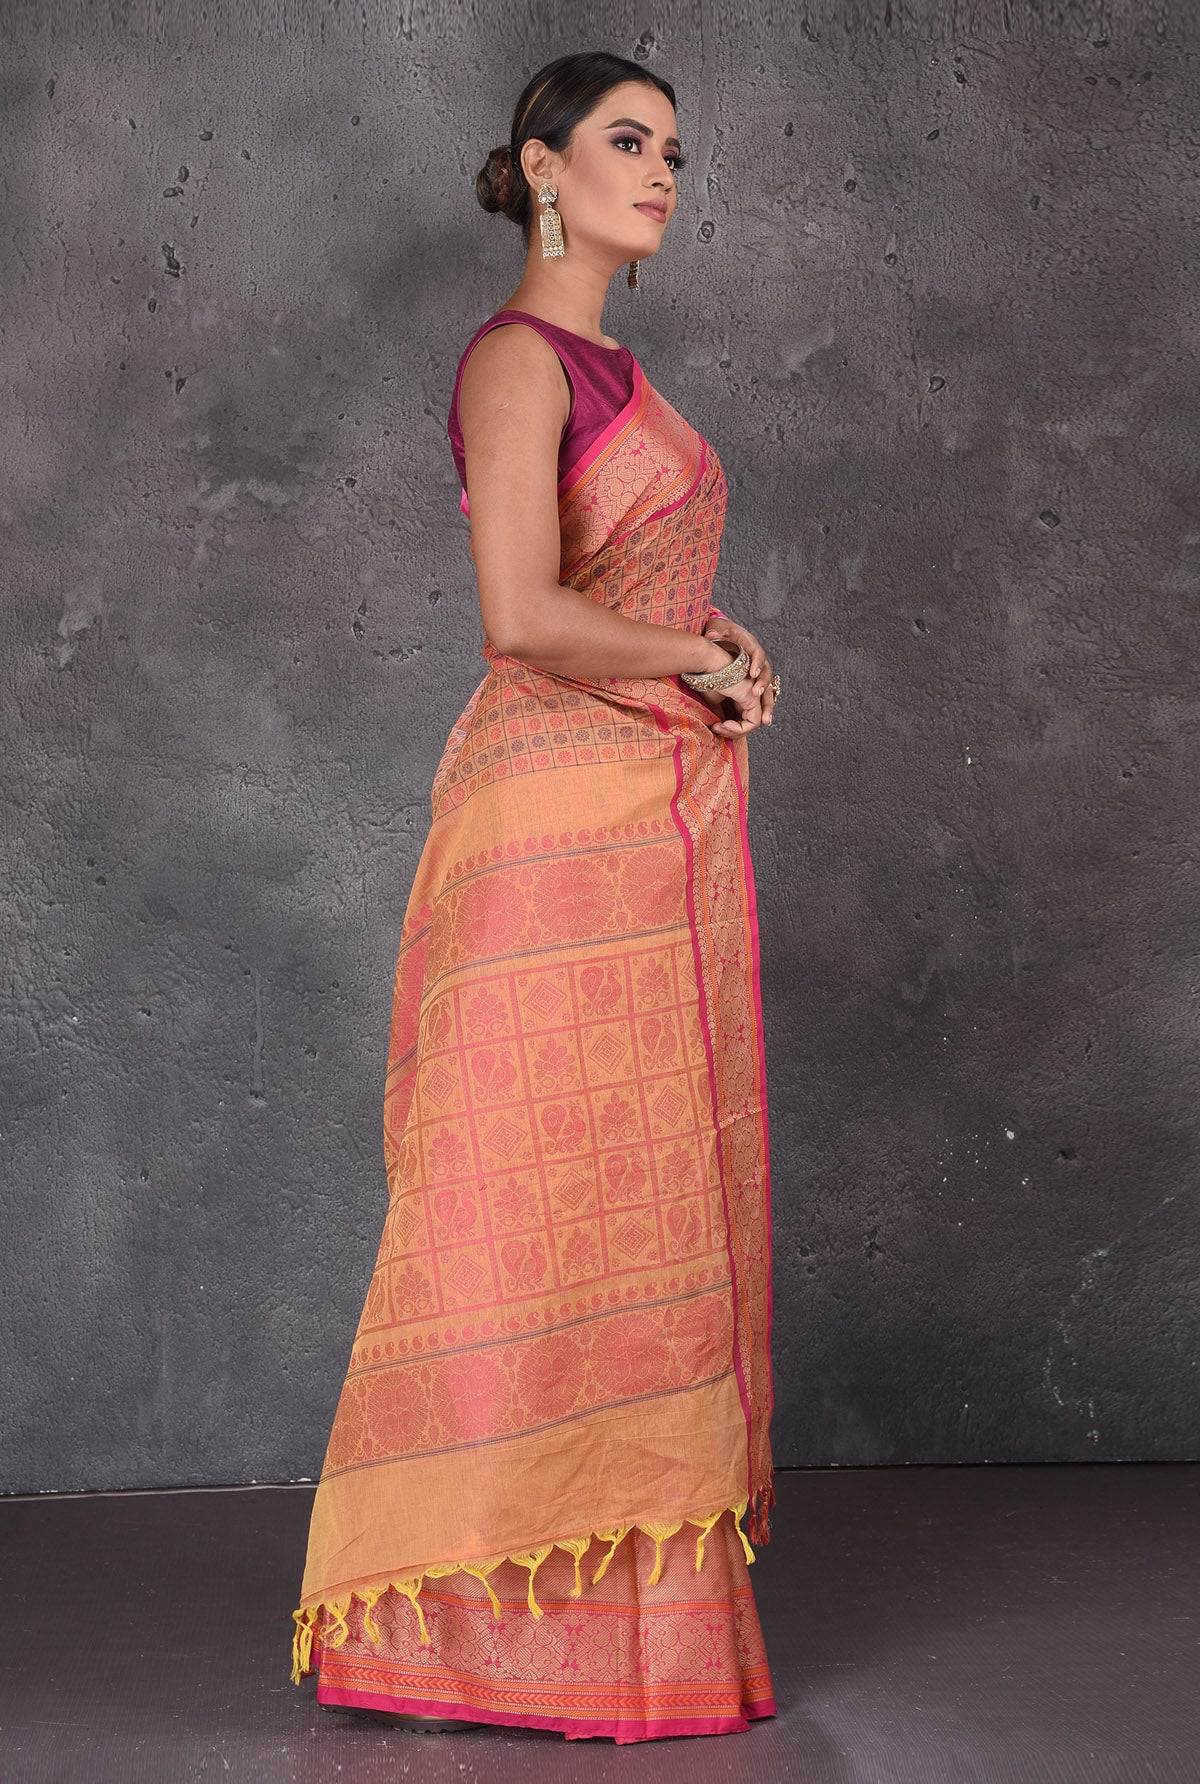 Buy beautiful brown and pink Kanchipuram cotton sari online in USA with pink zari border. Flaunt your ethnic style on special occasions with latest designer sarees, pure silk sarees, handwoven sarees, Kanchipuram silk sarees, embroidered sarees, georgette sarees from Pure Elegance Indian saree store in USA.-side